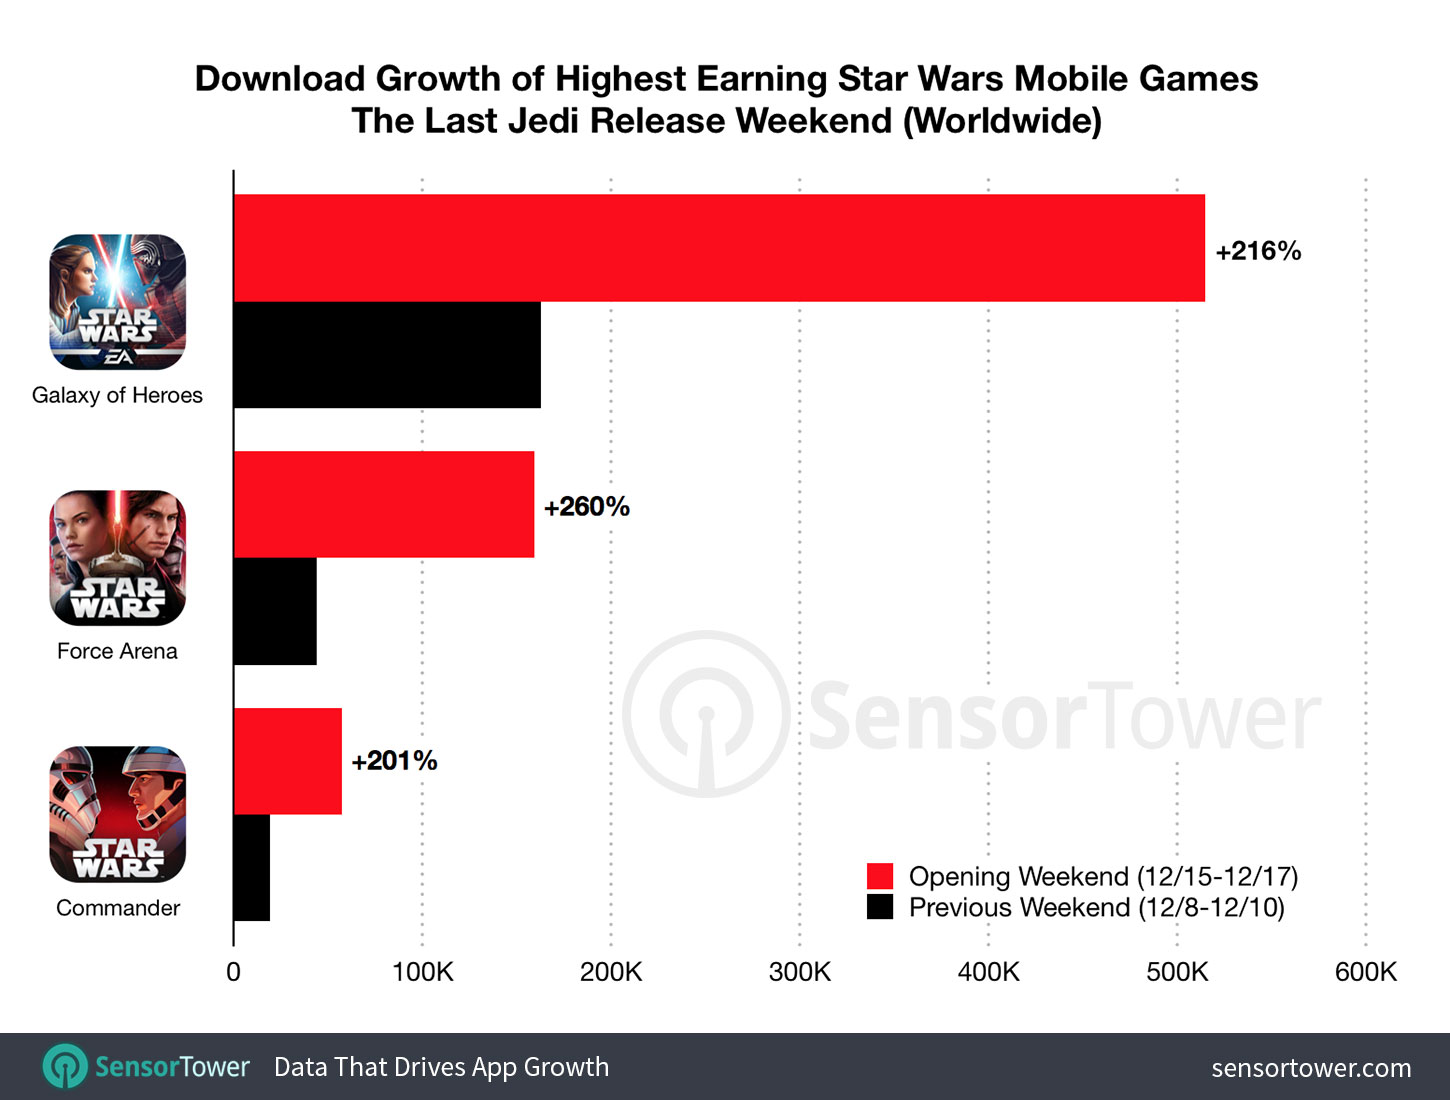 Chart showing the growth of Star Wars mobile game installs for the release weekend on The Last Jedi